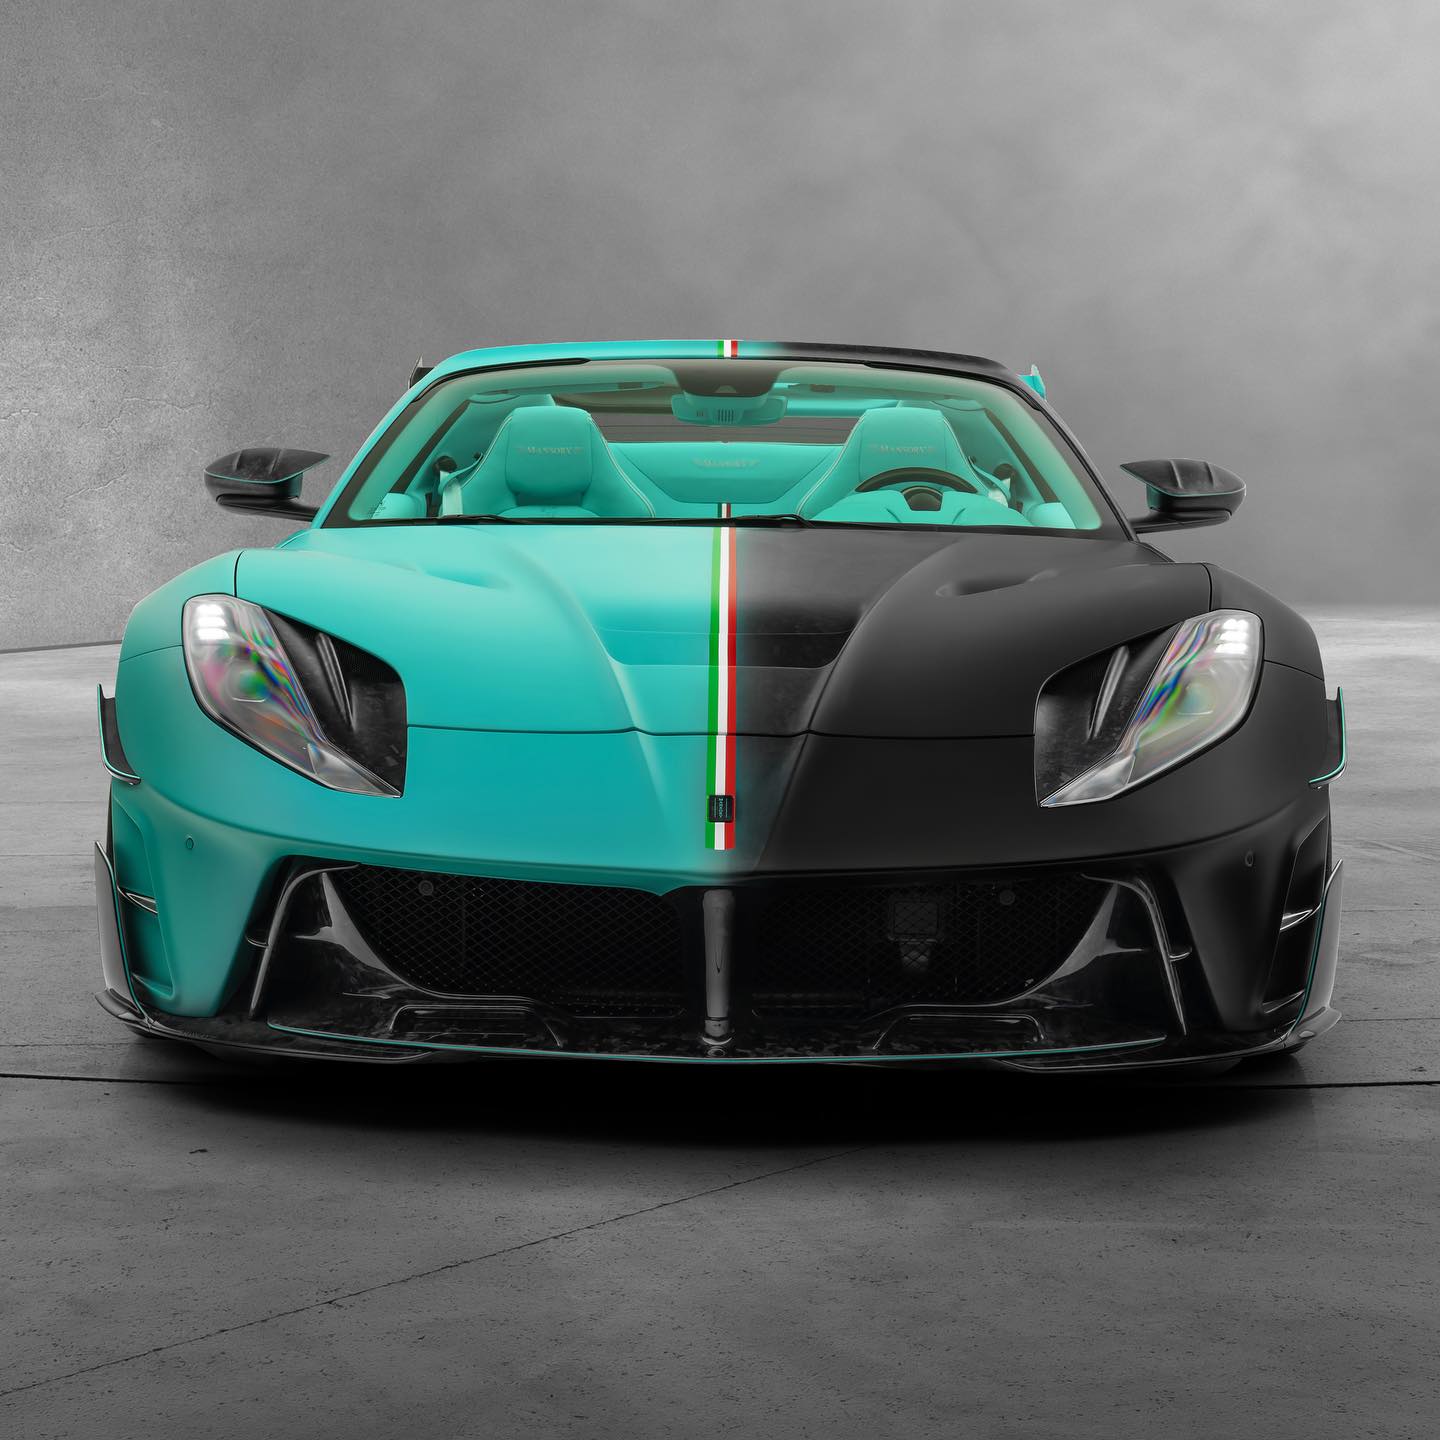 bao dj khaled combined with big narstie to launch a new watch collection project featuring the ferrari gts supercar customized by mansory 654b99da1dff7 Dj Khaled Combined With Big Narstie To Launch A New Watch Collection Project Featuring The Ferrari 812 Gts Supercar, Customized By Mansory